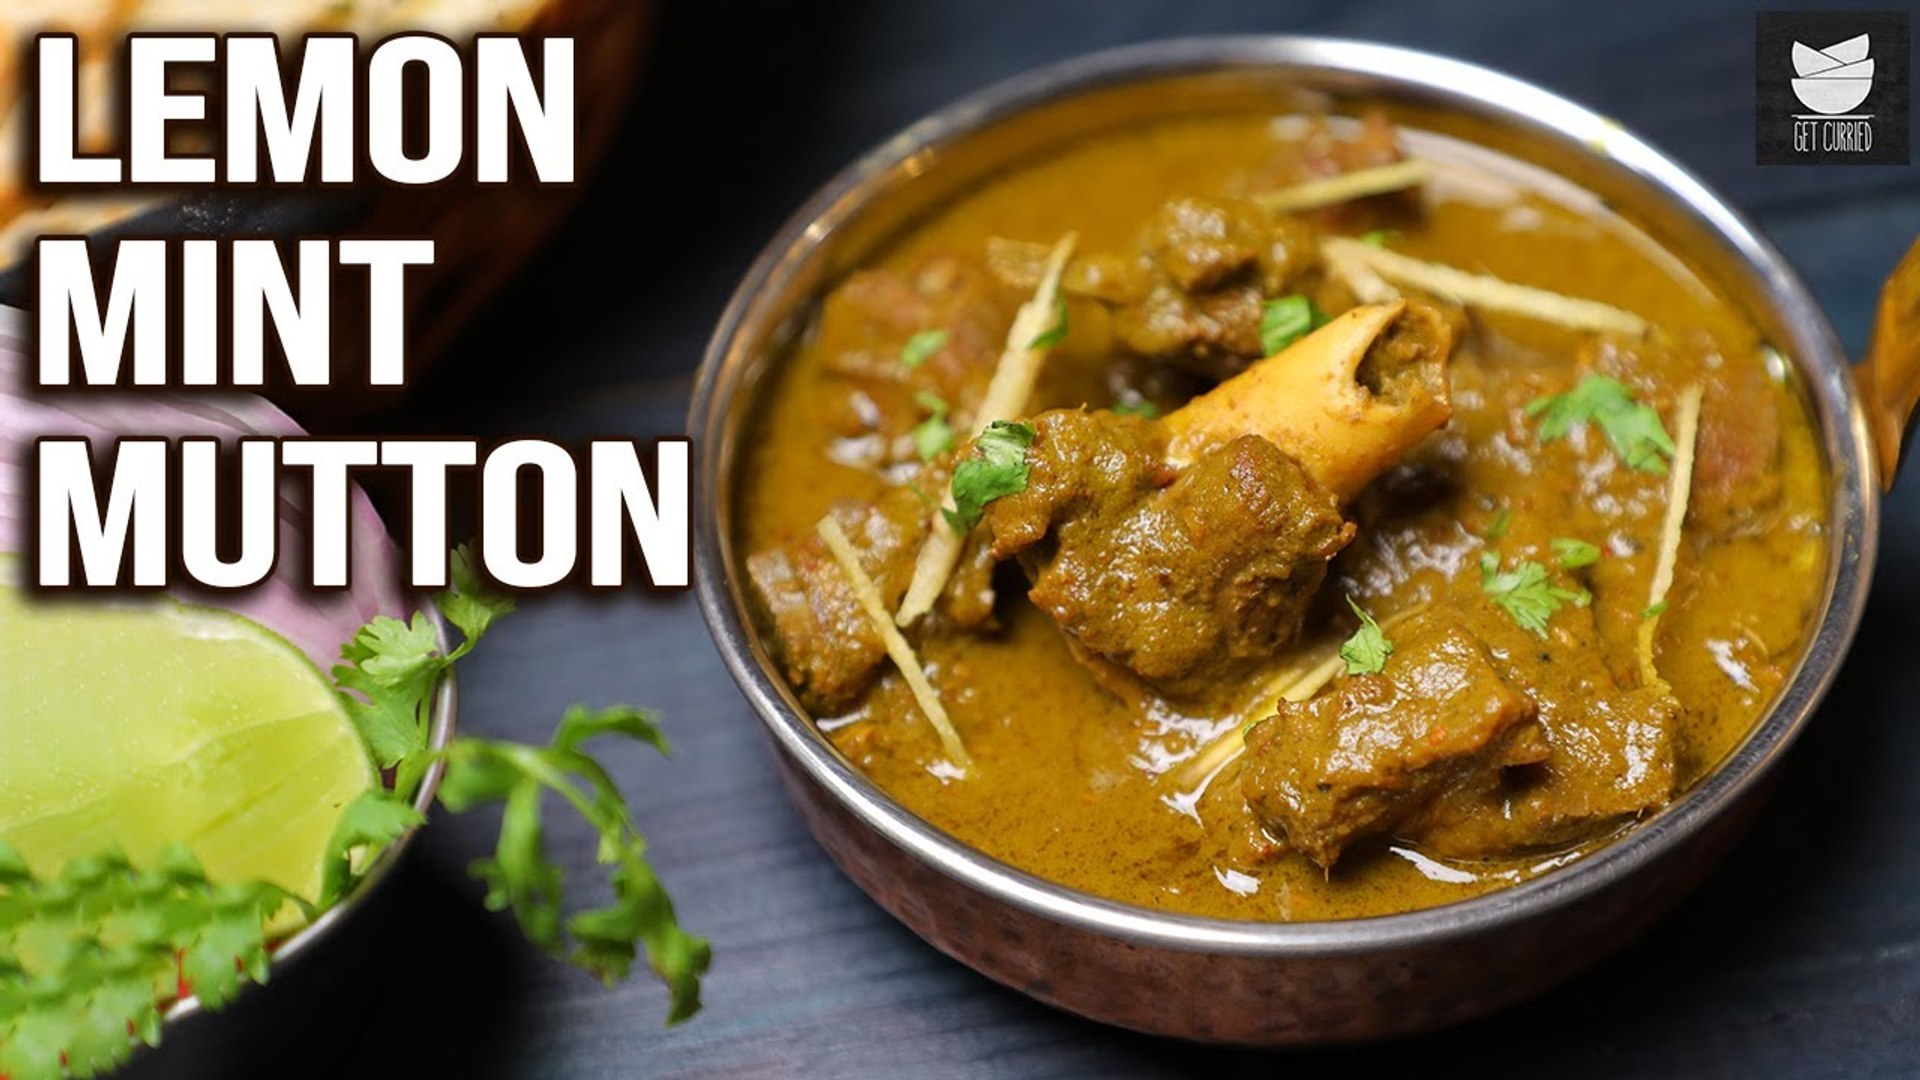 Lemon Mint Mutton | Spicy Green Lamb Curry | Mutton Curry Recipe By Prateek | Get Curried